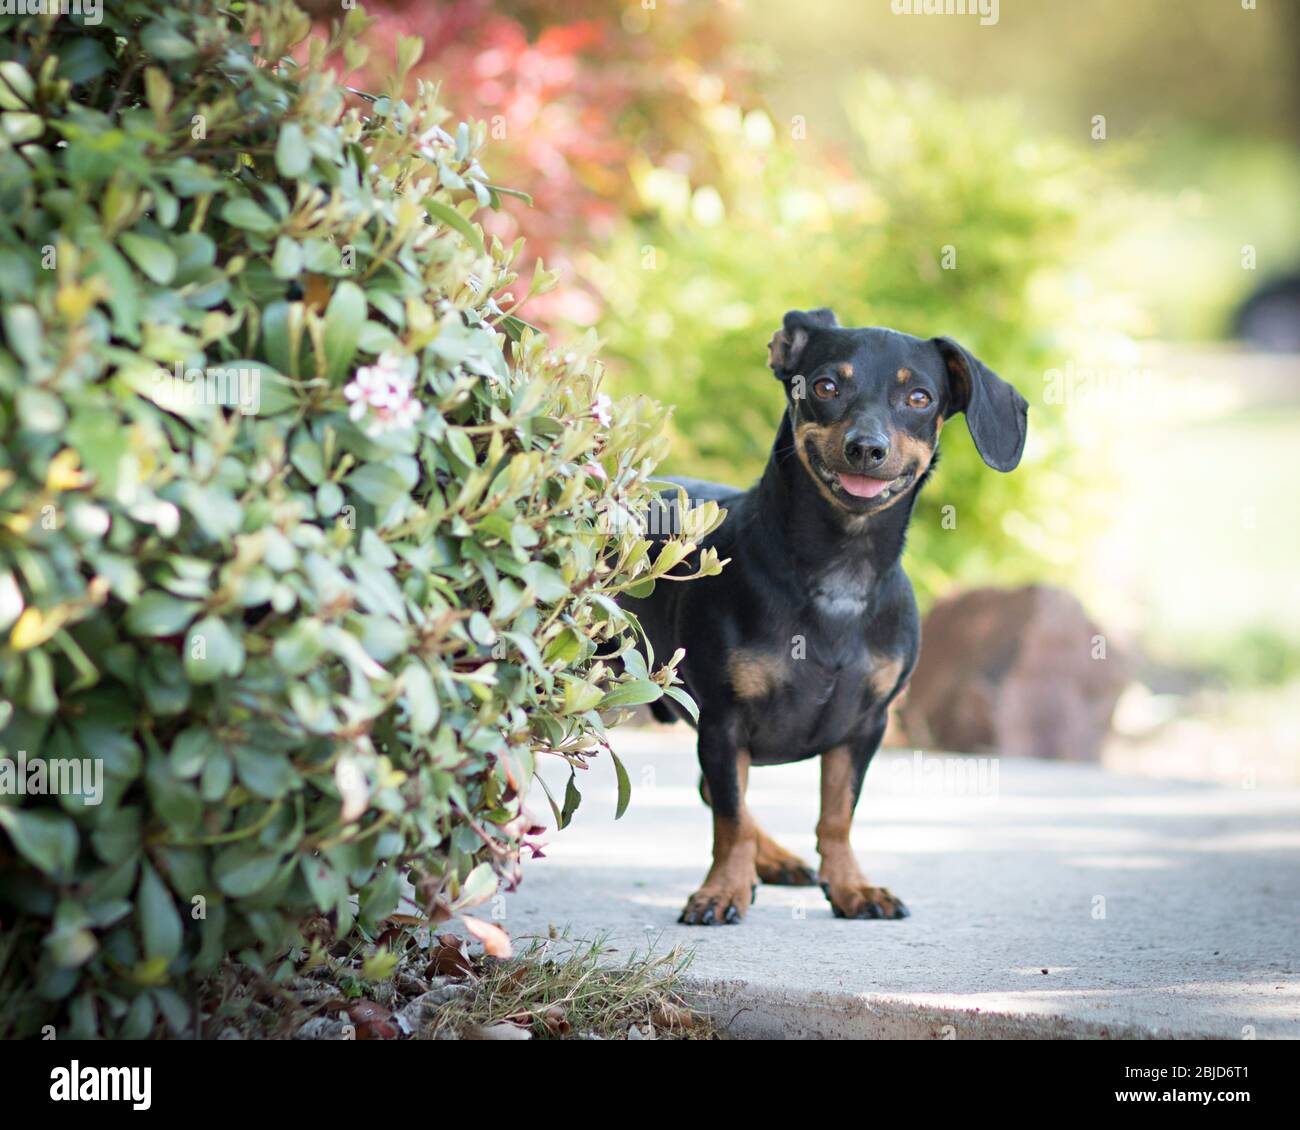 Silly smiling dachshund dog with floppy ear peeks around the shrubs and makes eye contact outdoors in the garden Stock Photo